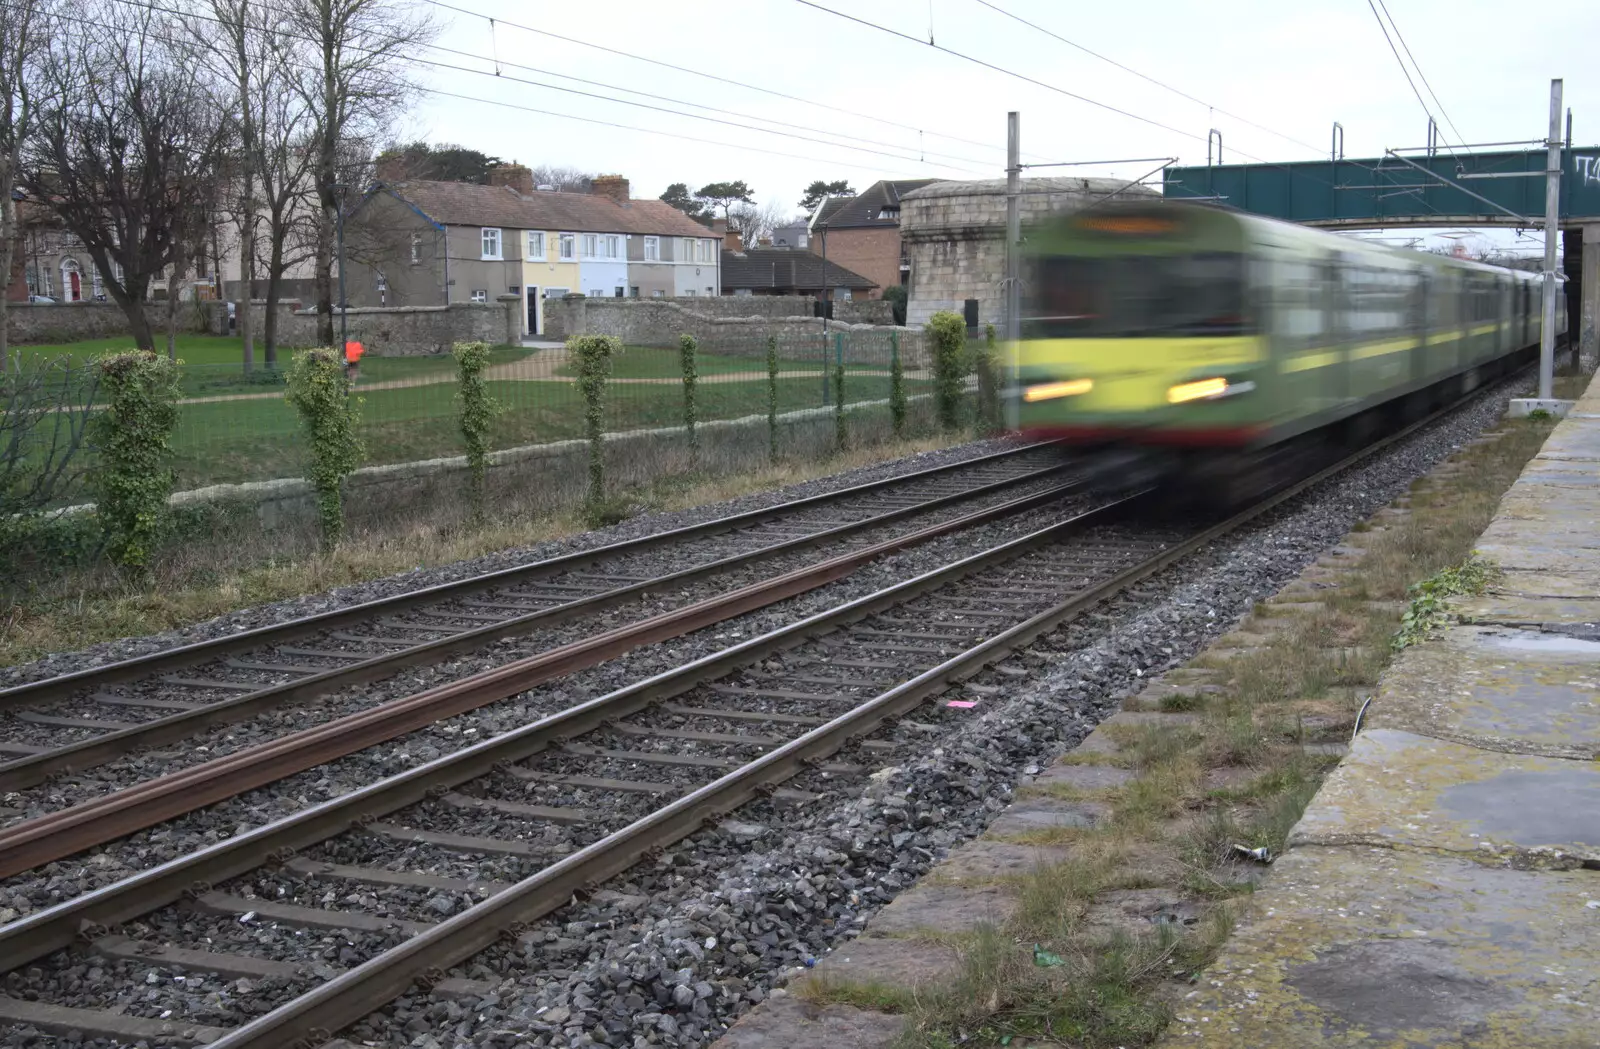 A DART train rumbles past, from The End of the Breffni, Blackrock, Dublin - 18th February 2023